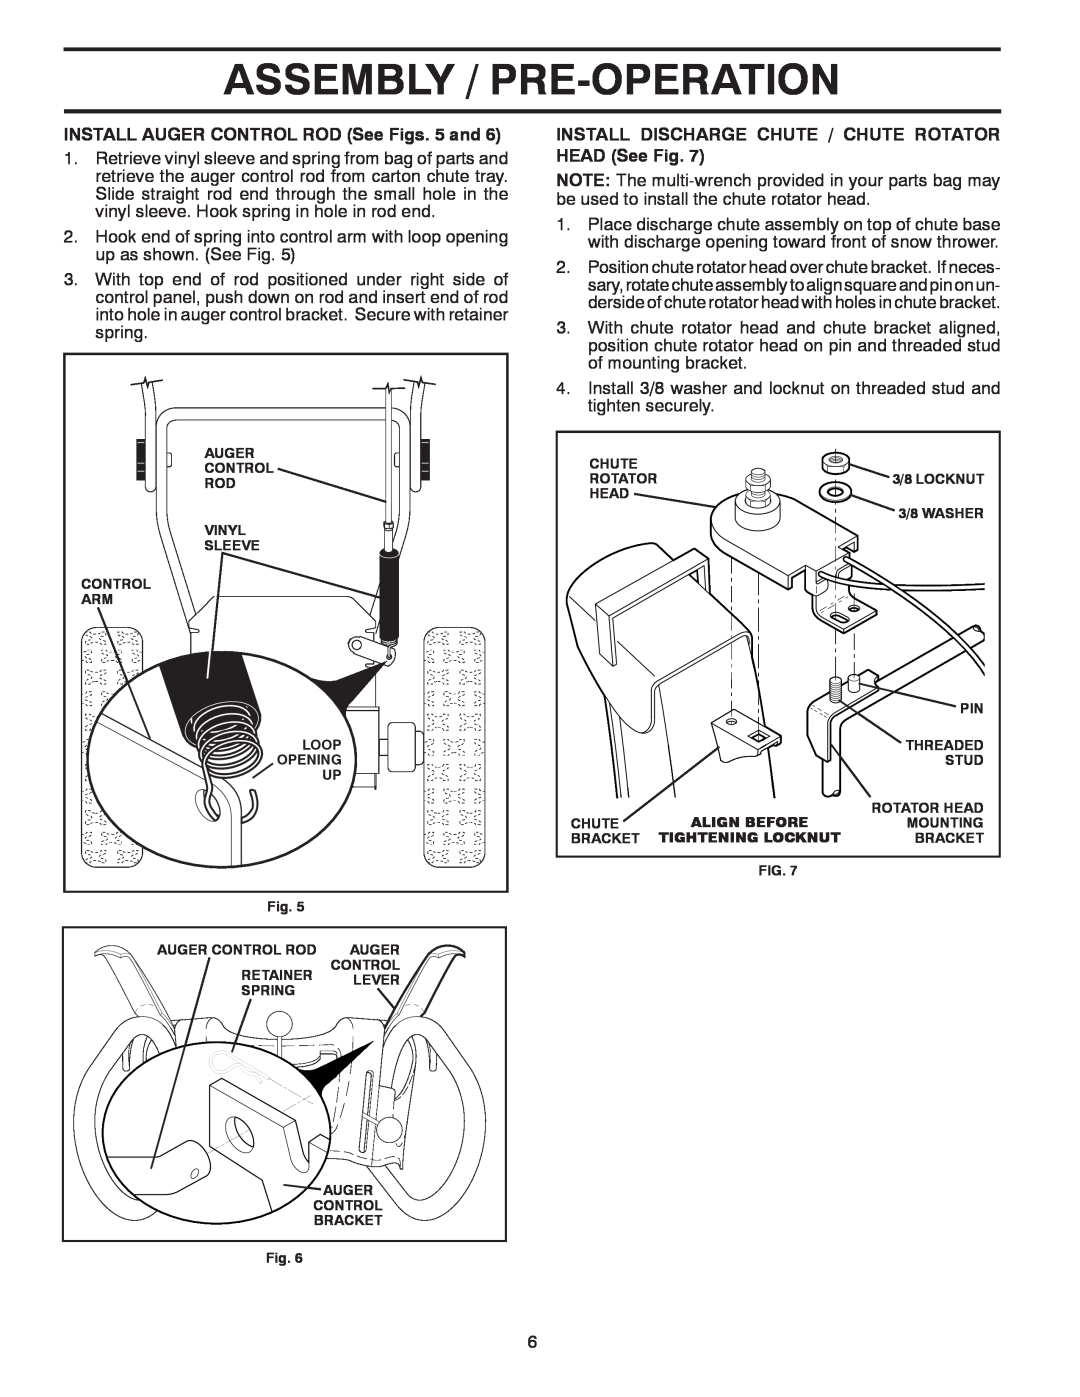 Poulan 437390, 96198003601 owner manual Assembly / Pre-Operation, INSTALL AUGER CONTROL ROD See Figs. 5 and 